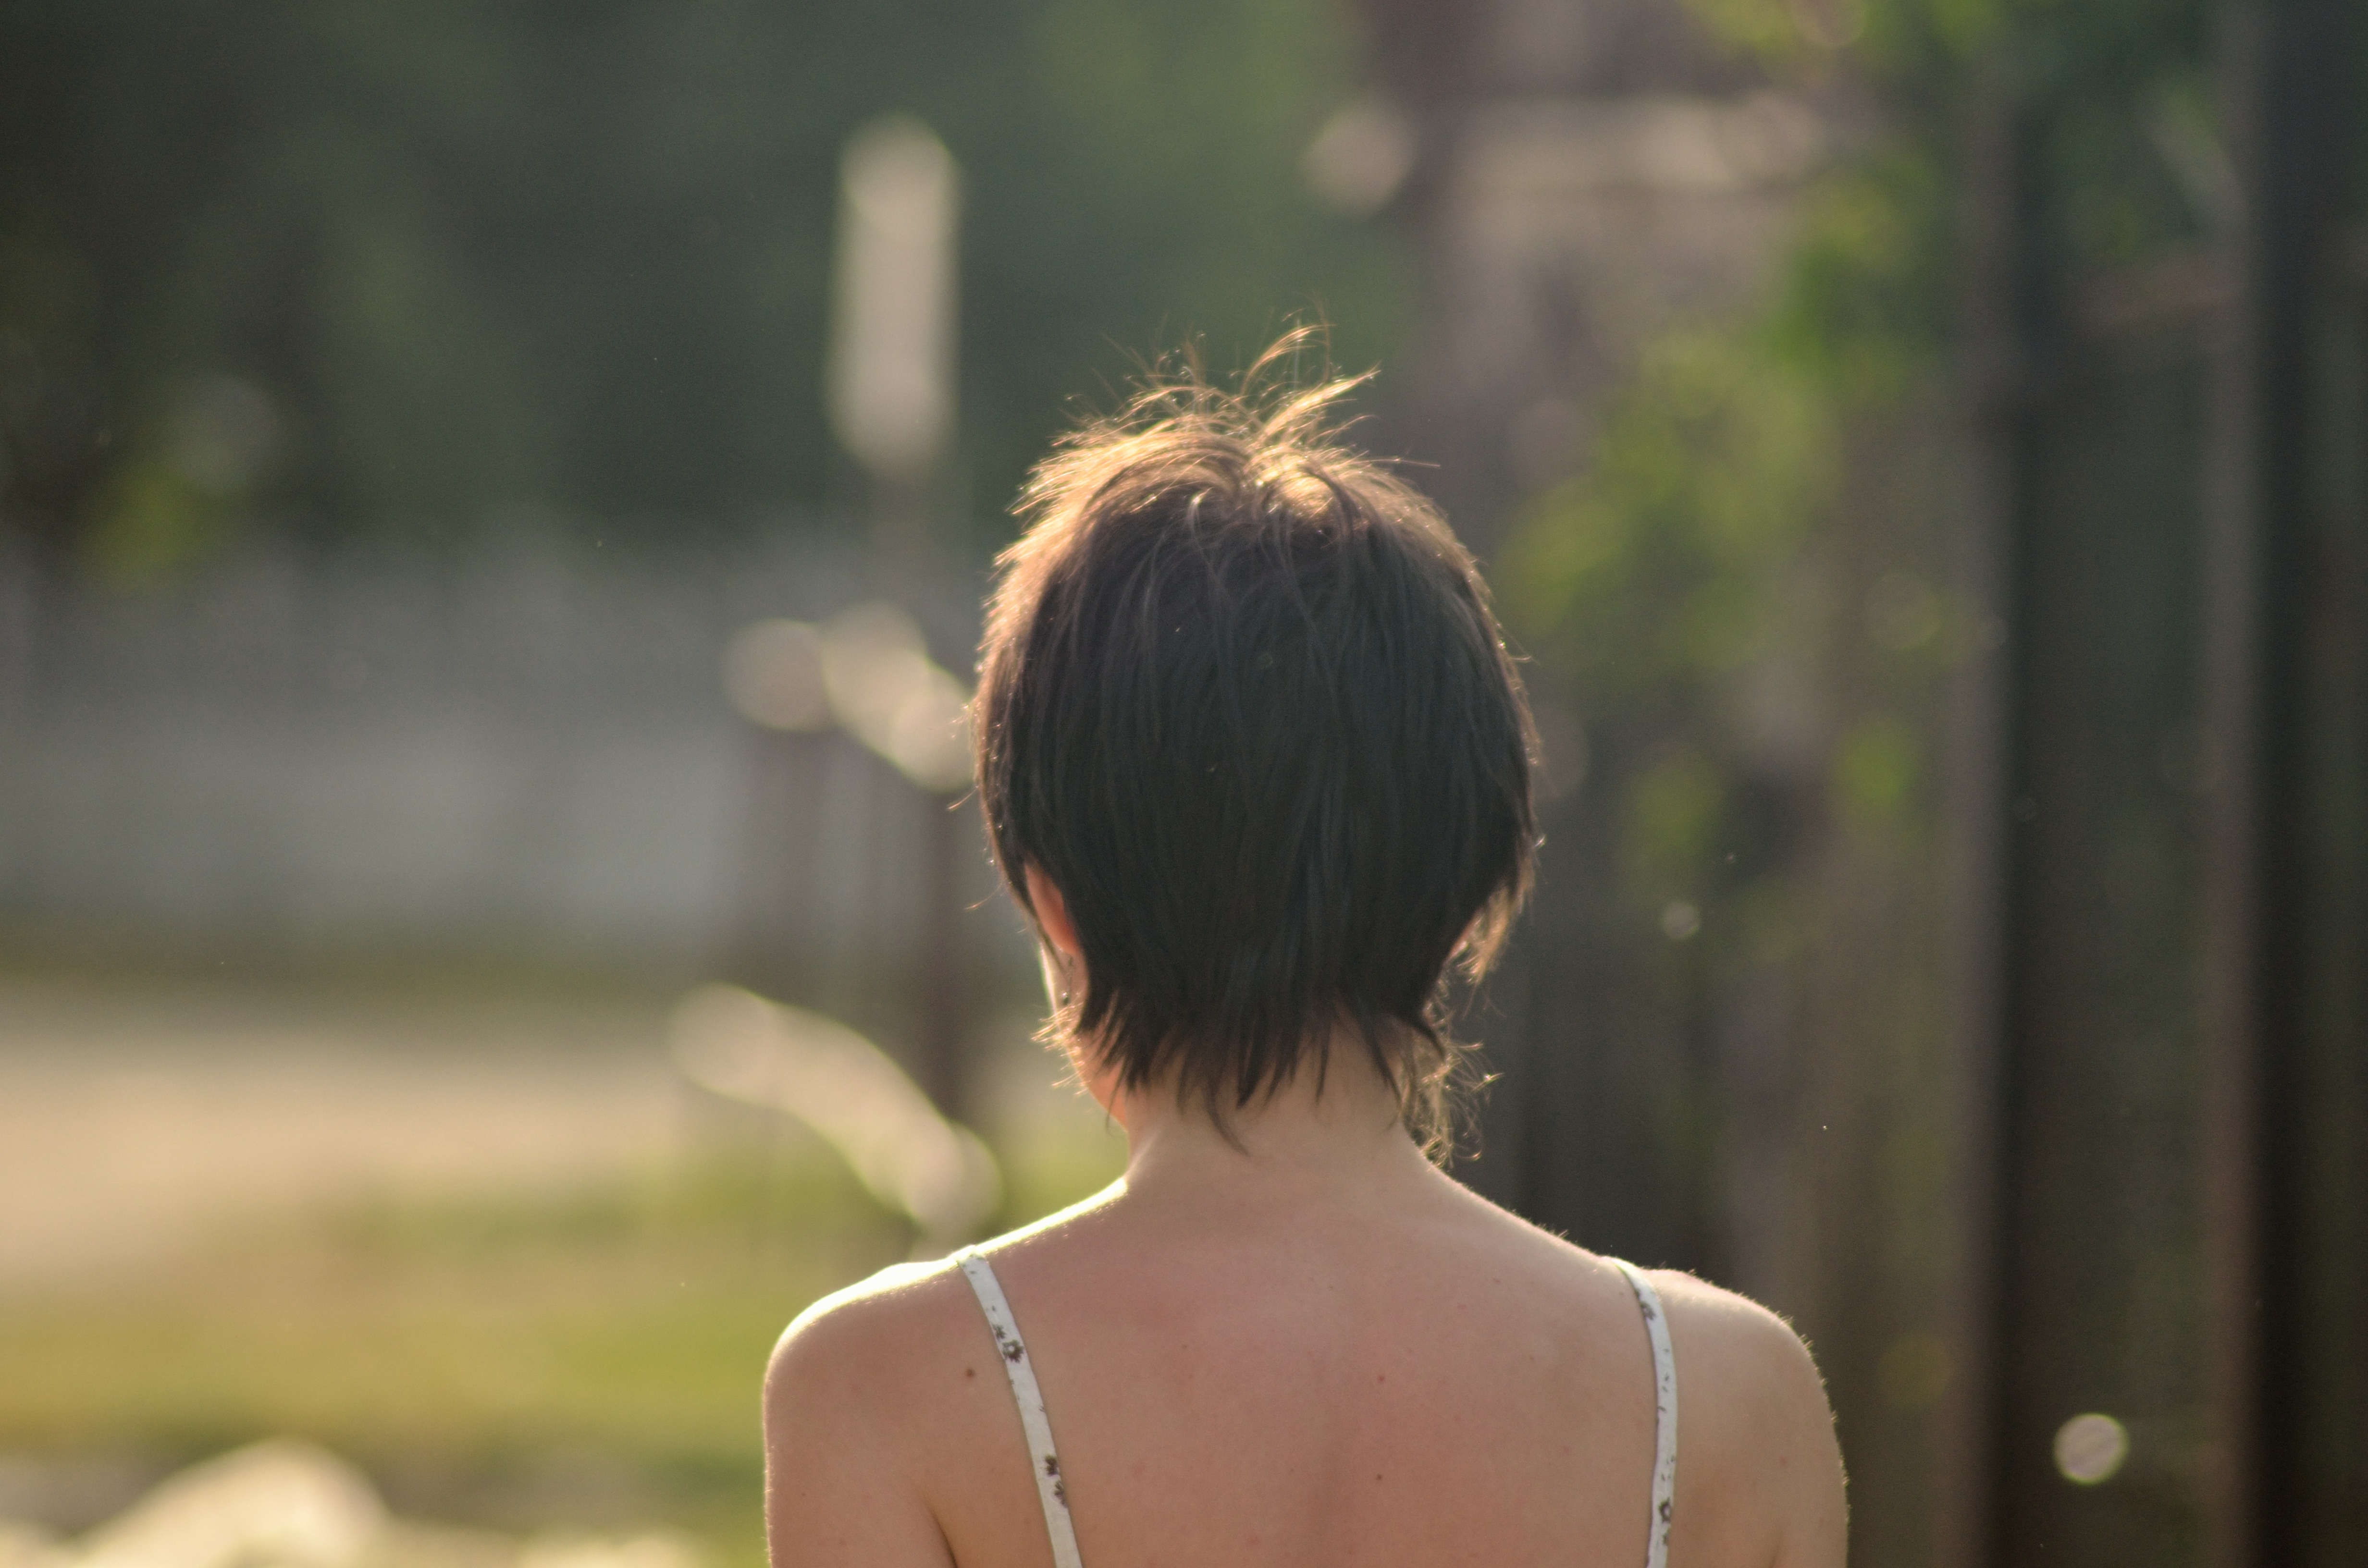 Short Haired Girl Seen from Behind | gimmeges